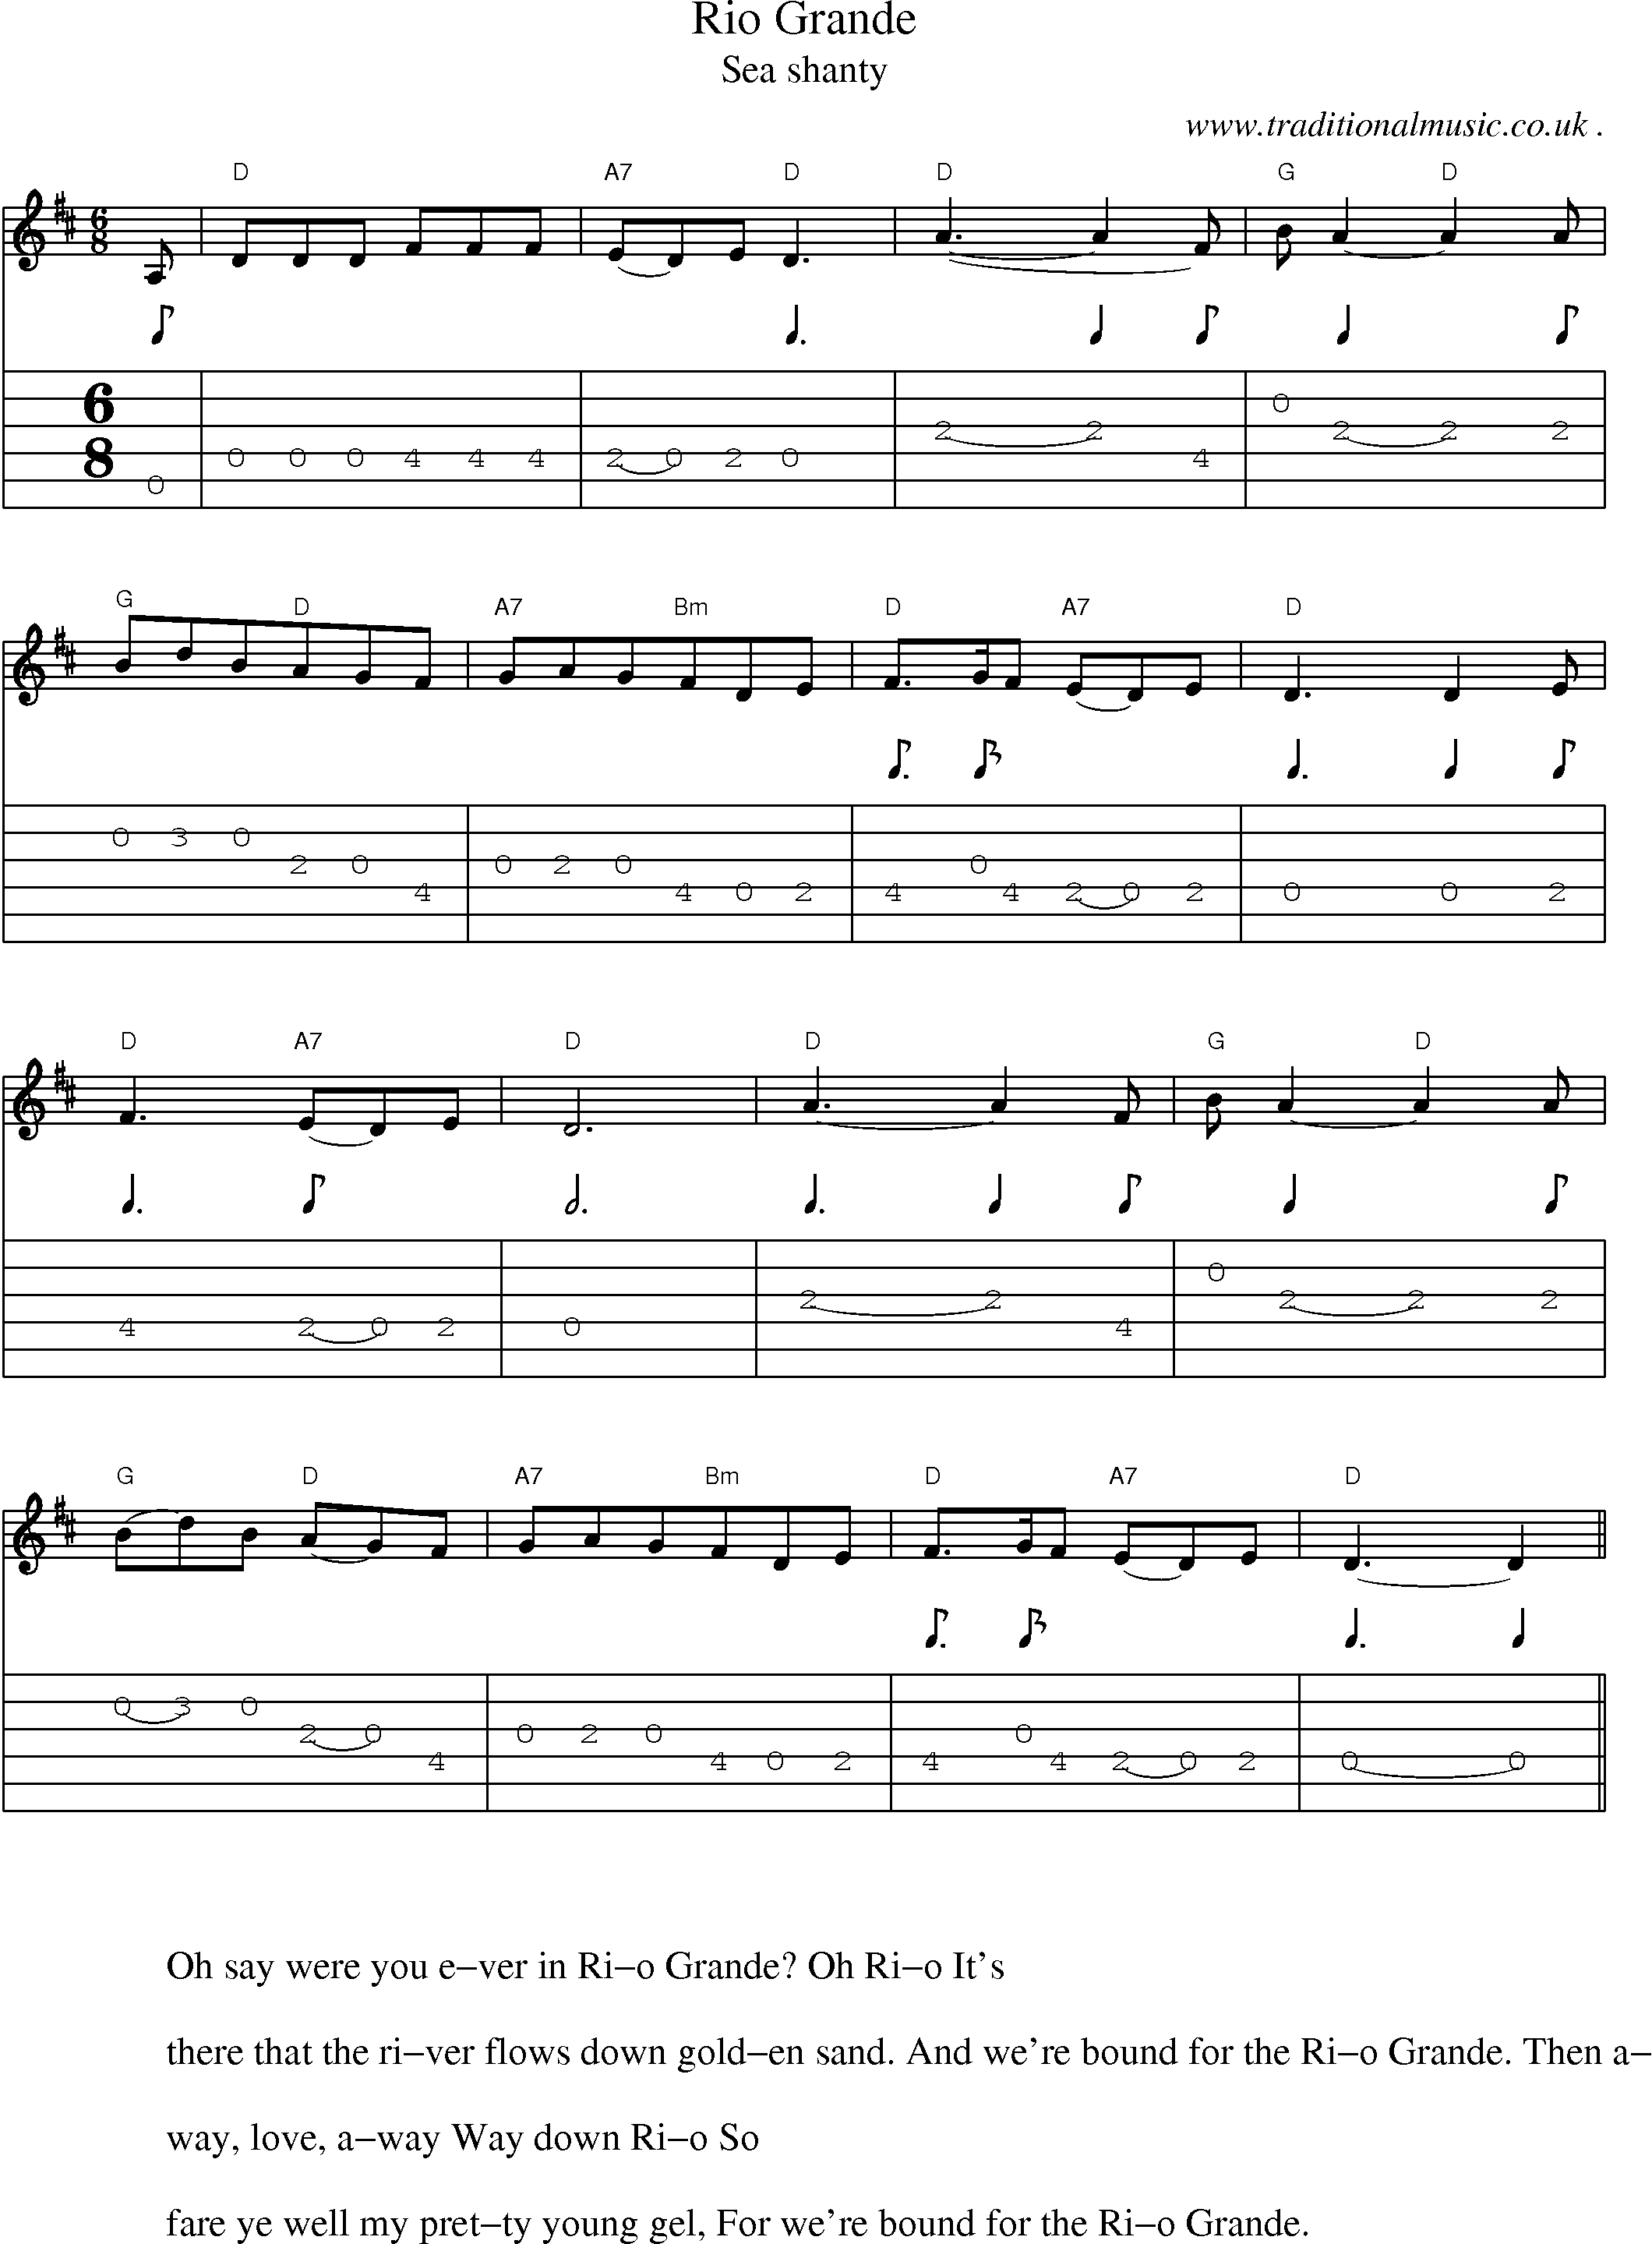 Sheet-Music and Guitar Tabs for Rio Grande